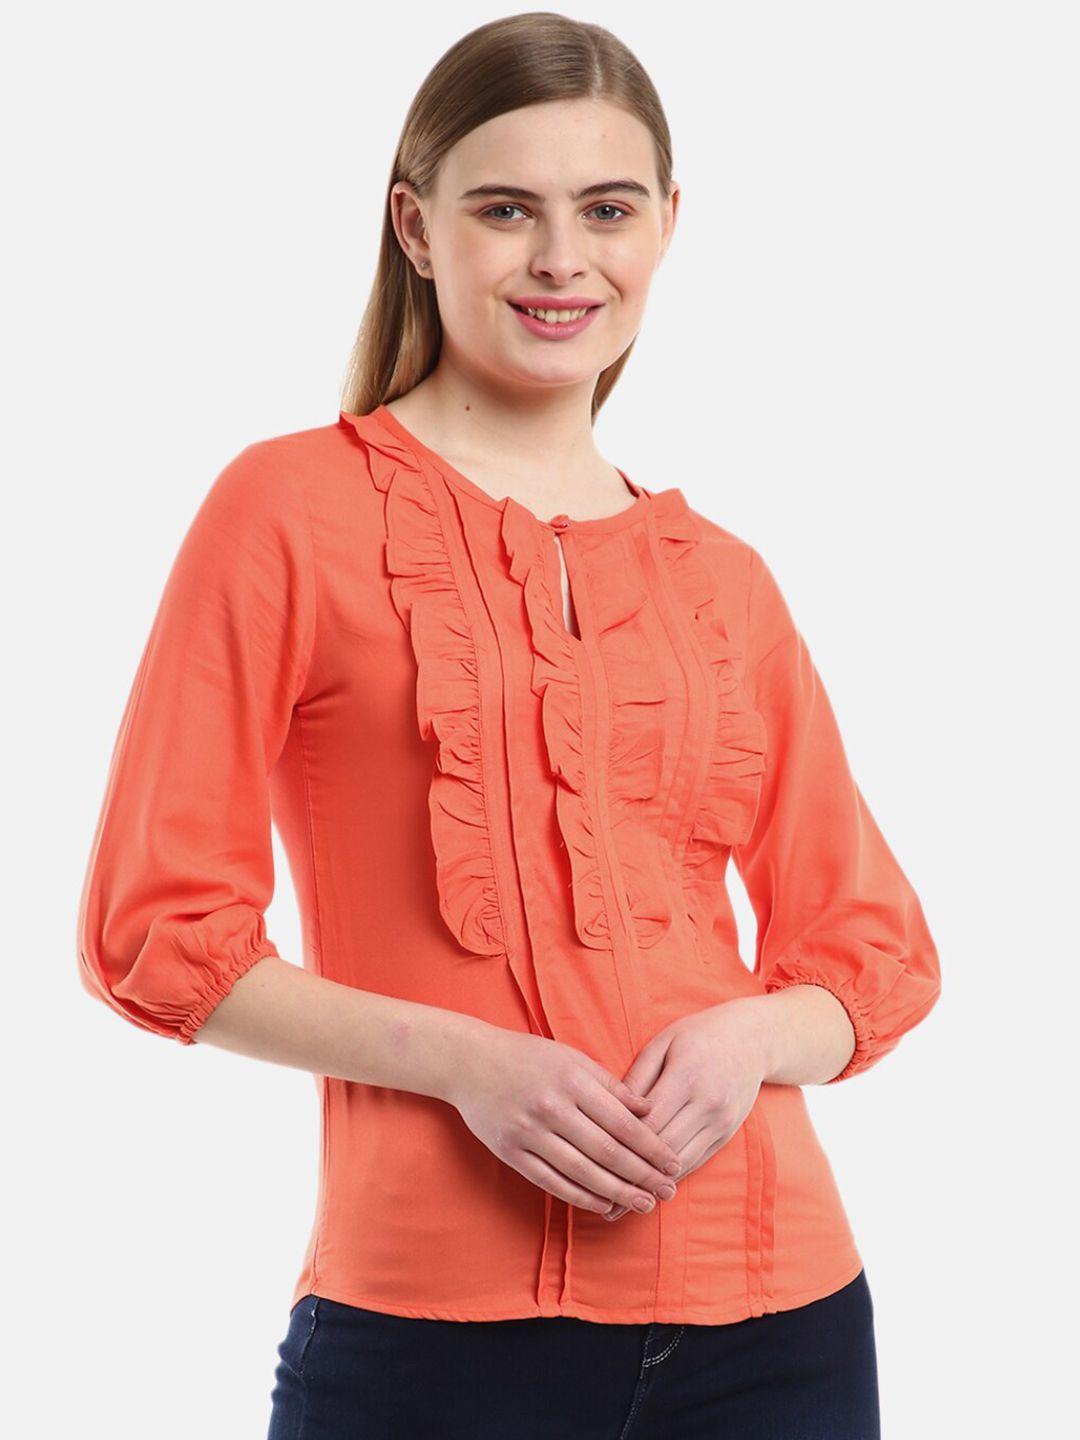 v-mart women western solid coral keyhole neck ruffled top